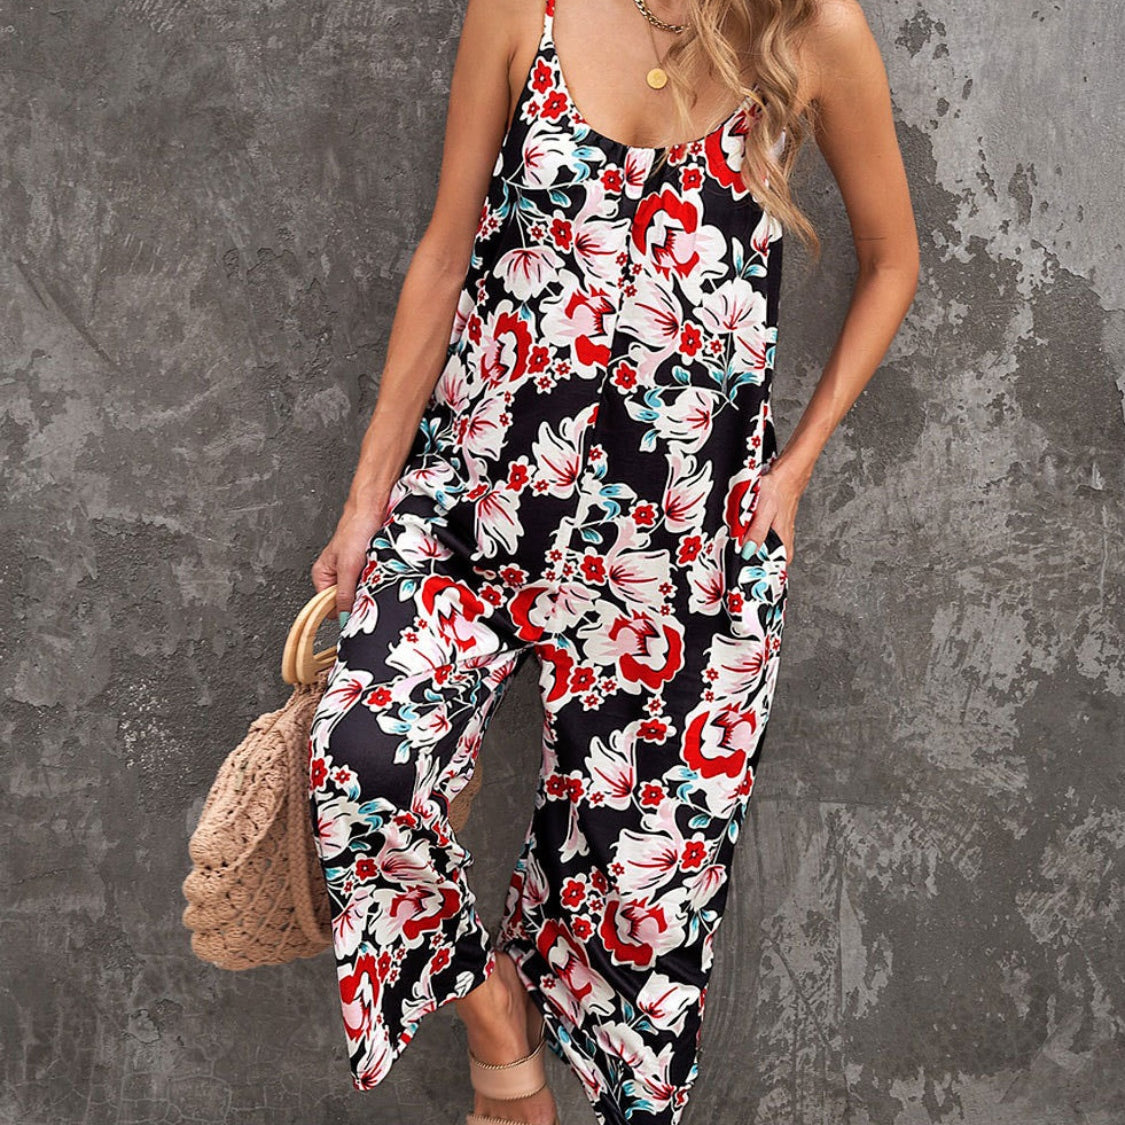 Printed Spaghetti Strap Jumpsuit with Pockets